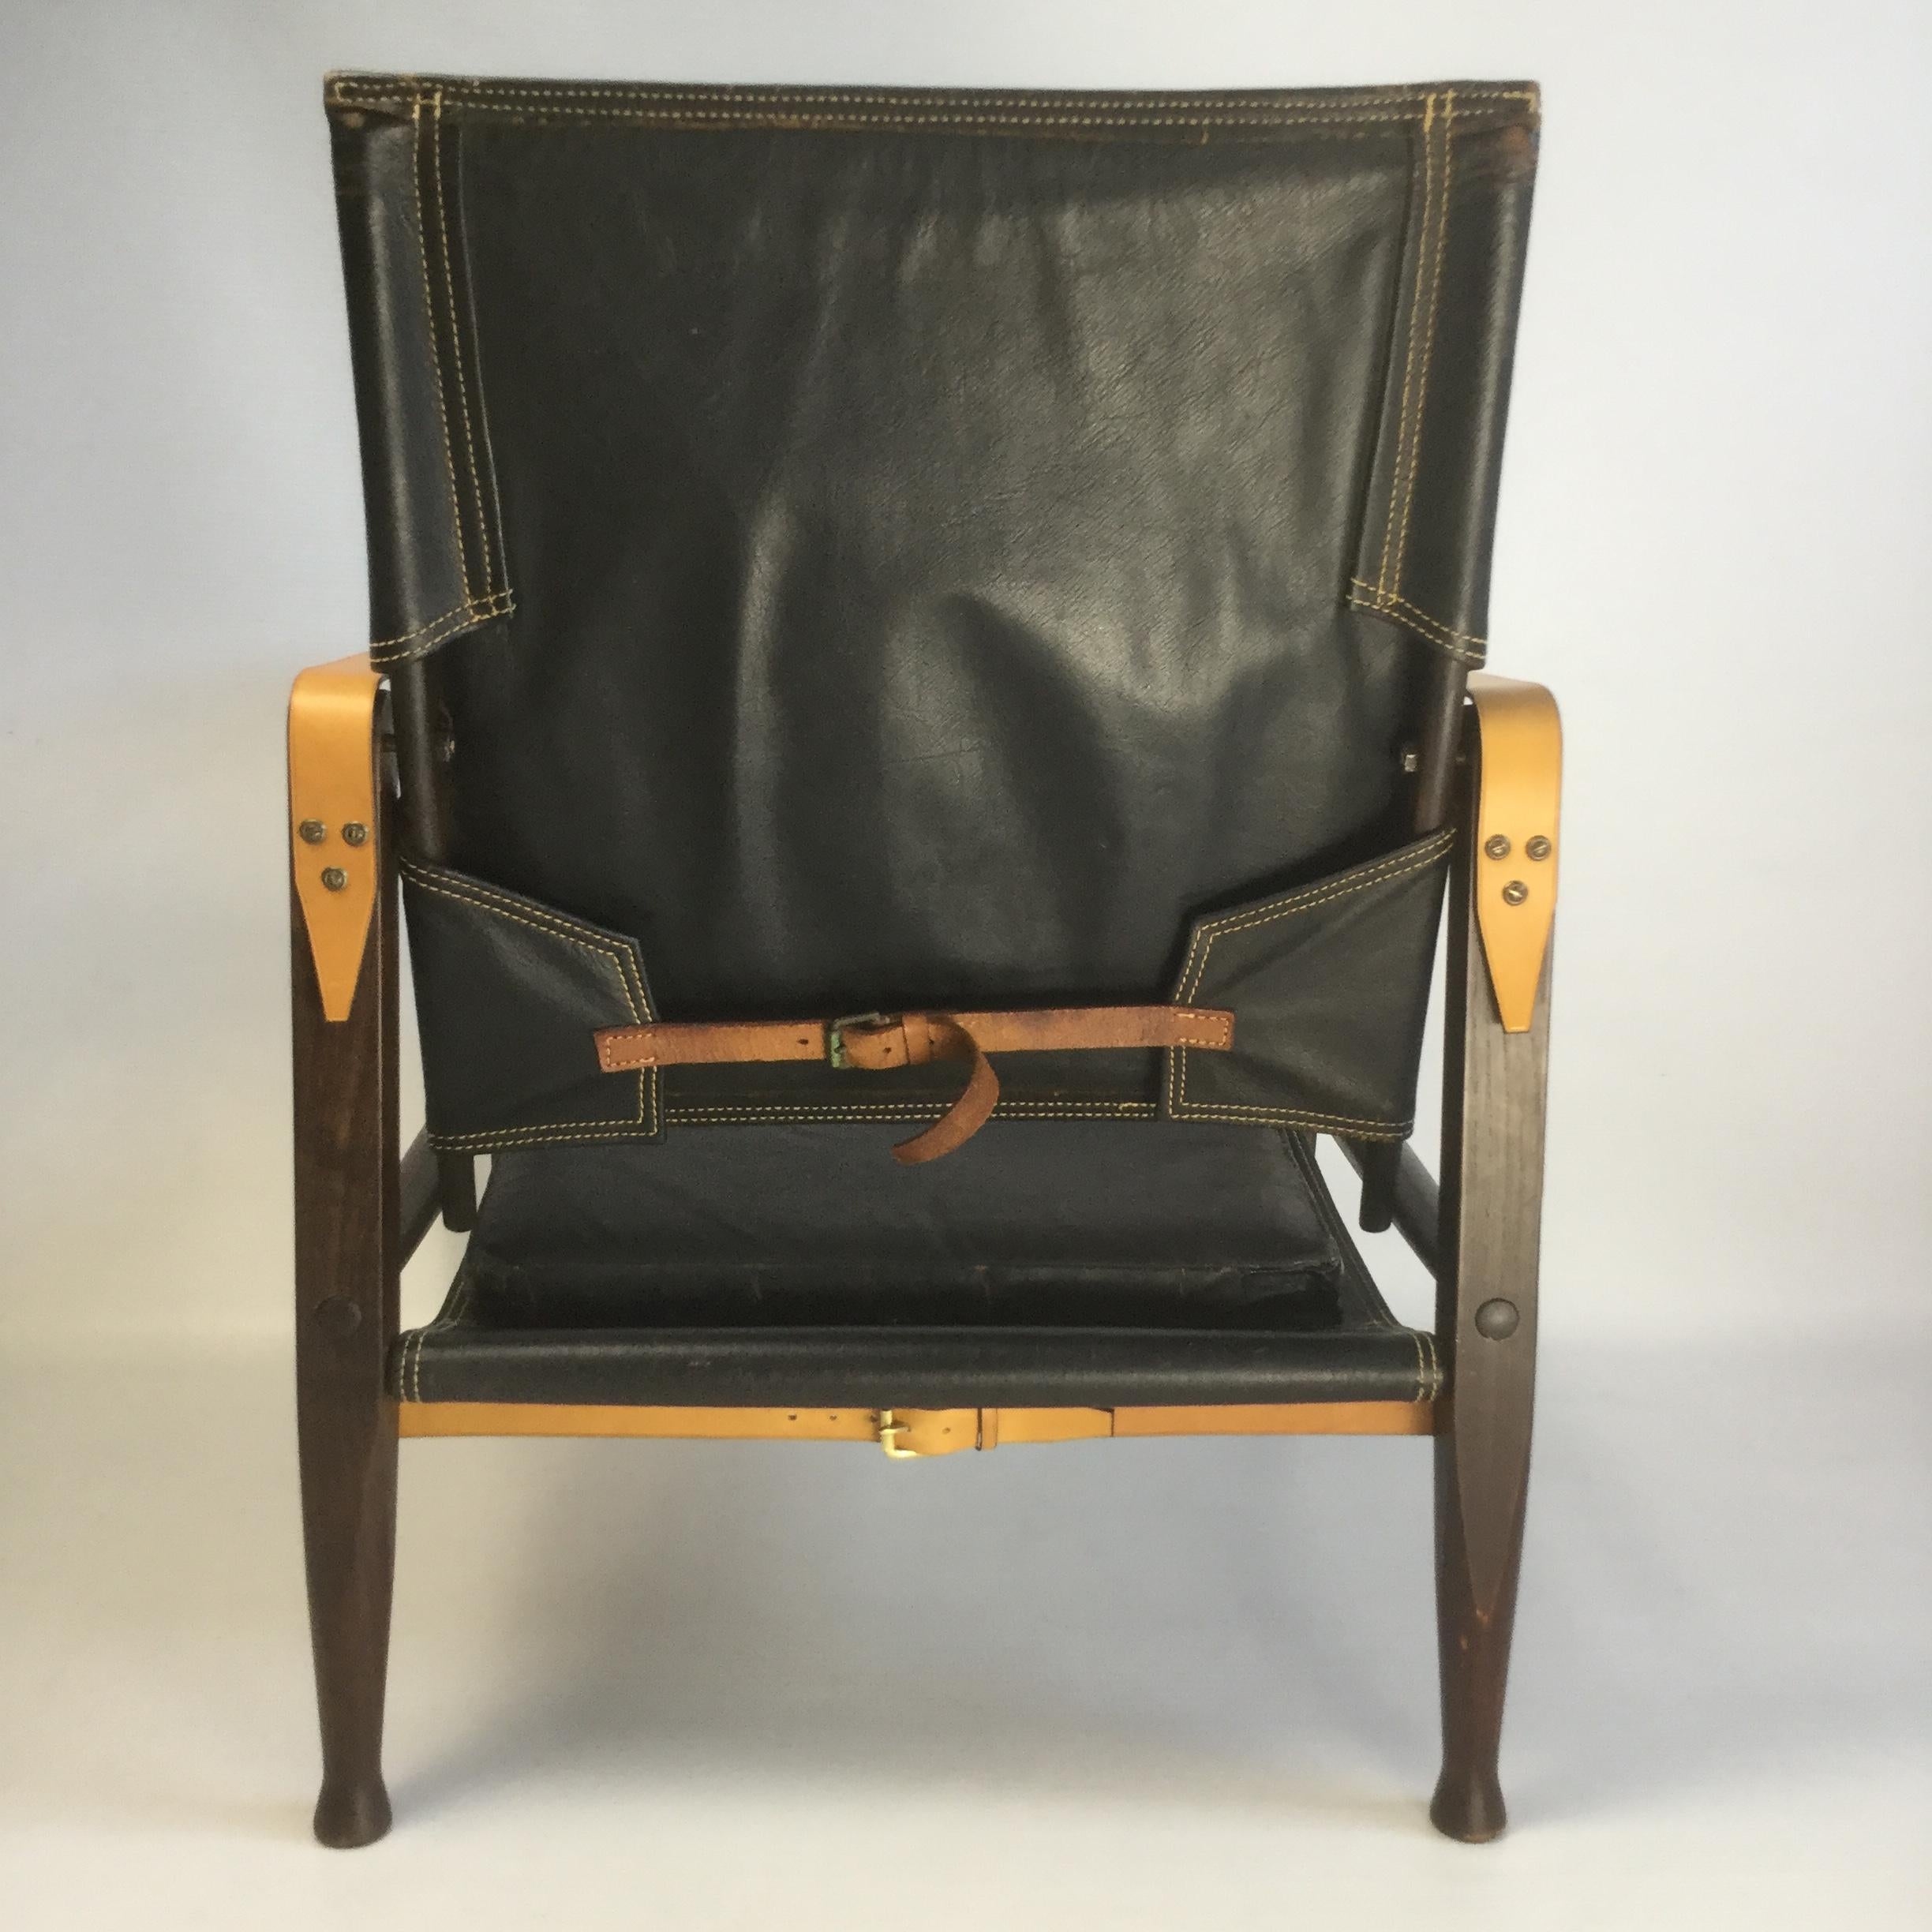 Iconic Safari chair design by Kaare Klint in 1933 and manufactured by Rud Rasmussen
This chair can easily be dismantled and assembled without using tools.
(Very good for travelling and shipping)
The frame is in stained solid ash
Original leather